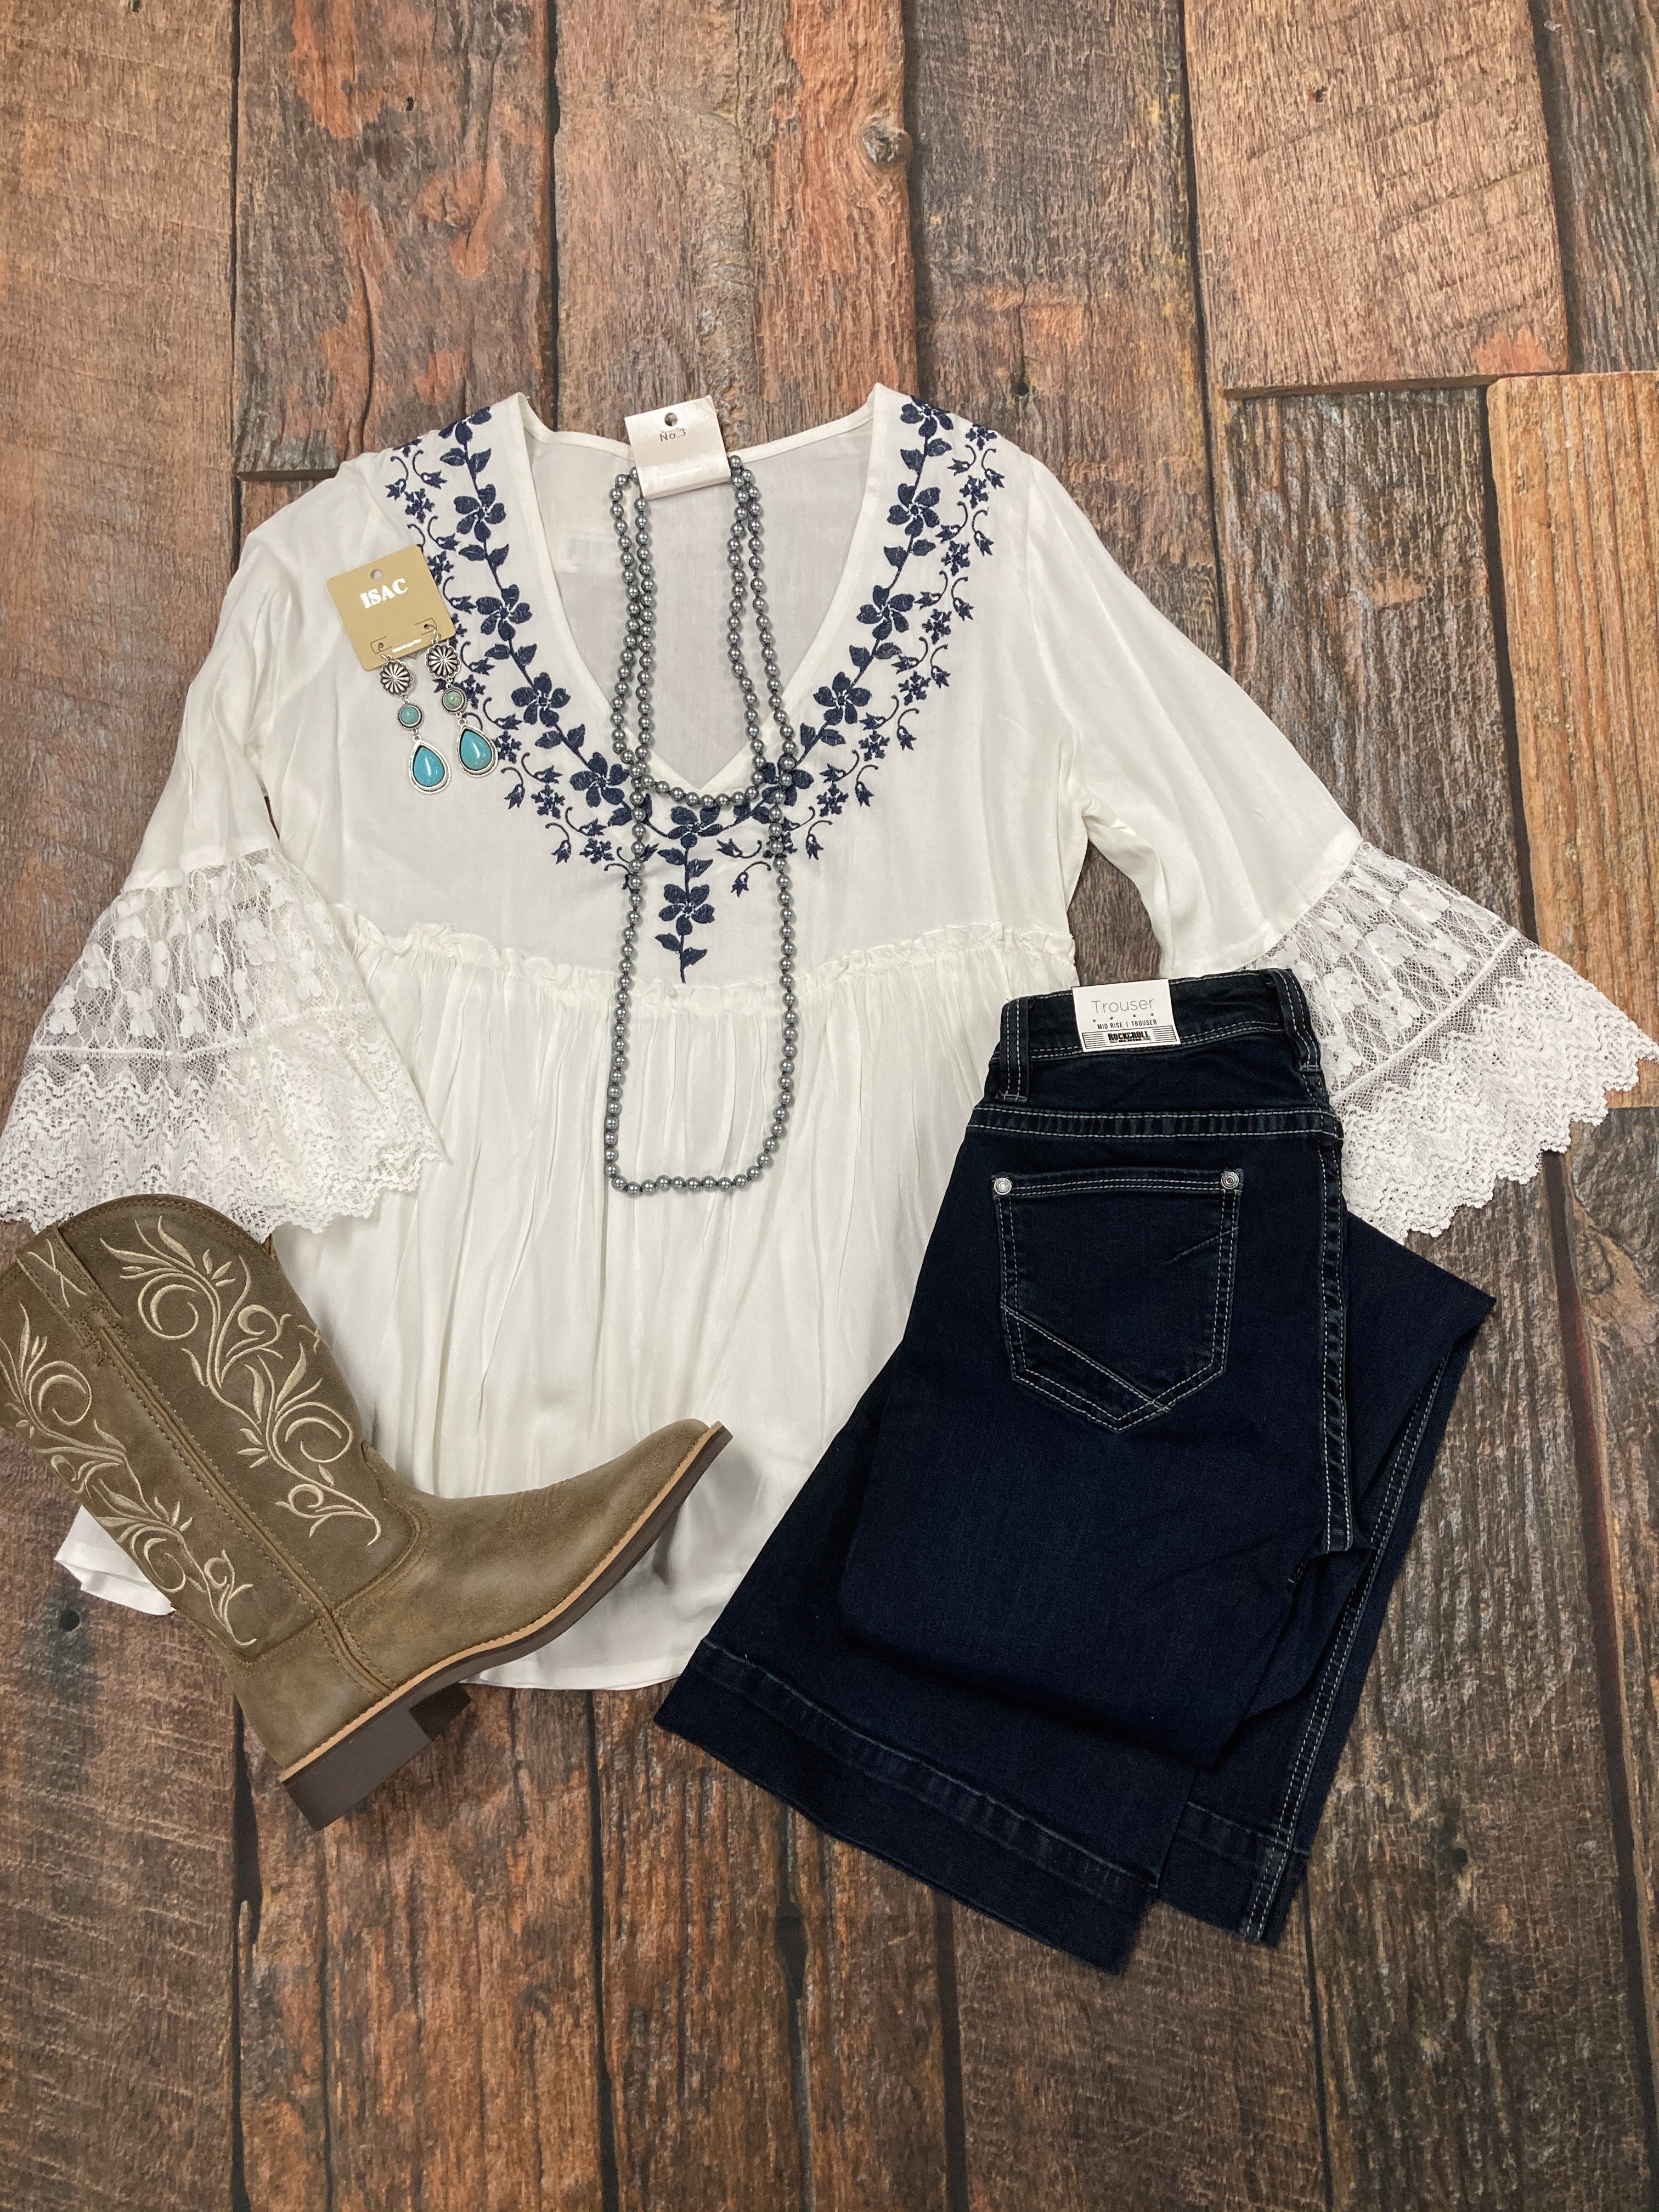 Ladies Flat Lay of the Day - 8/1/20 - Stockyard Style